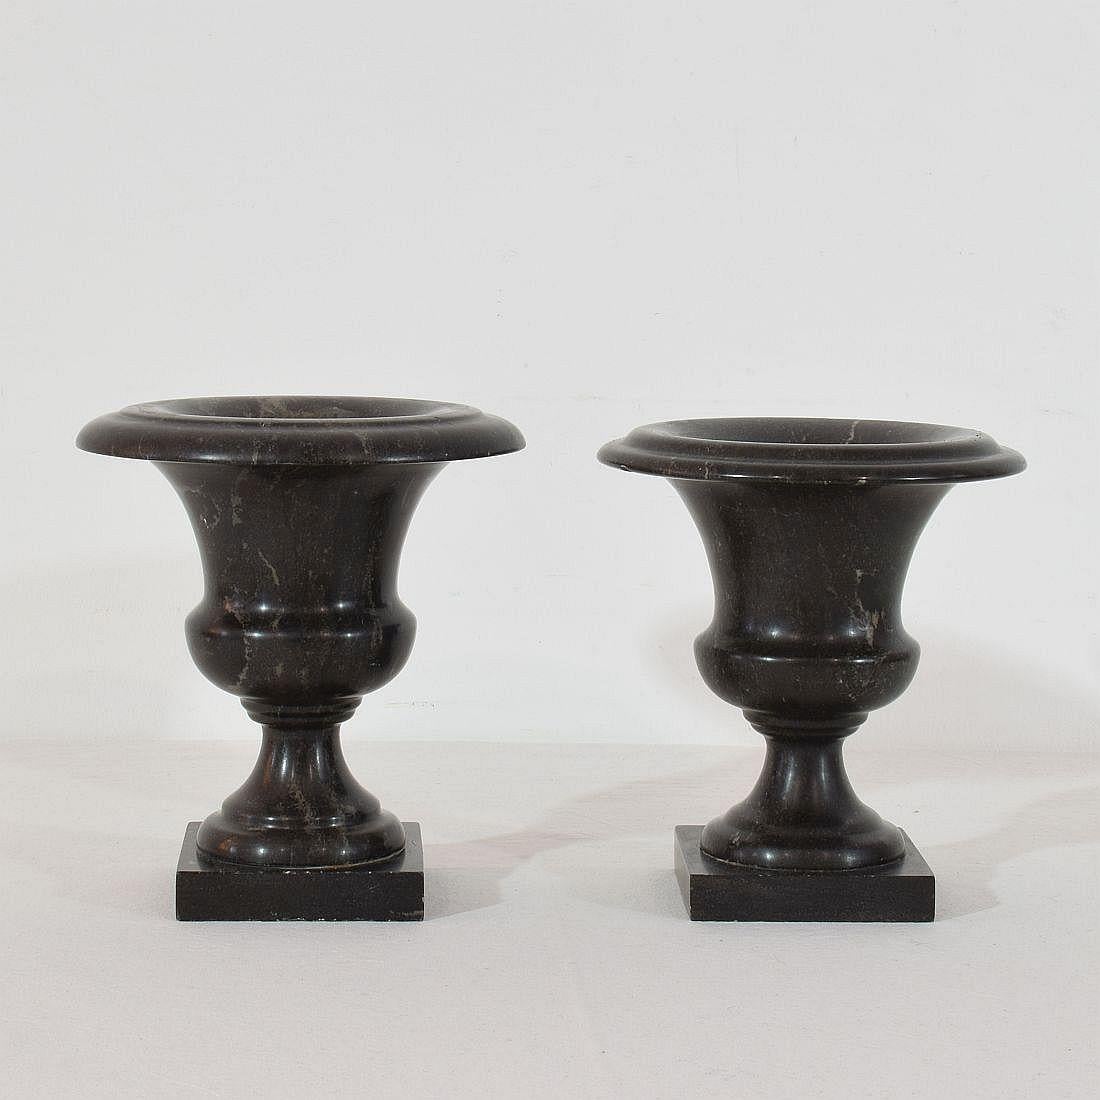 Rare black marble vases. Beautiful decorative centrepieces.
France, circa 1800-1850.
Weathered, small losses and old repair.










  